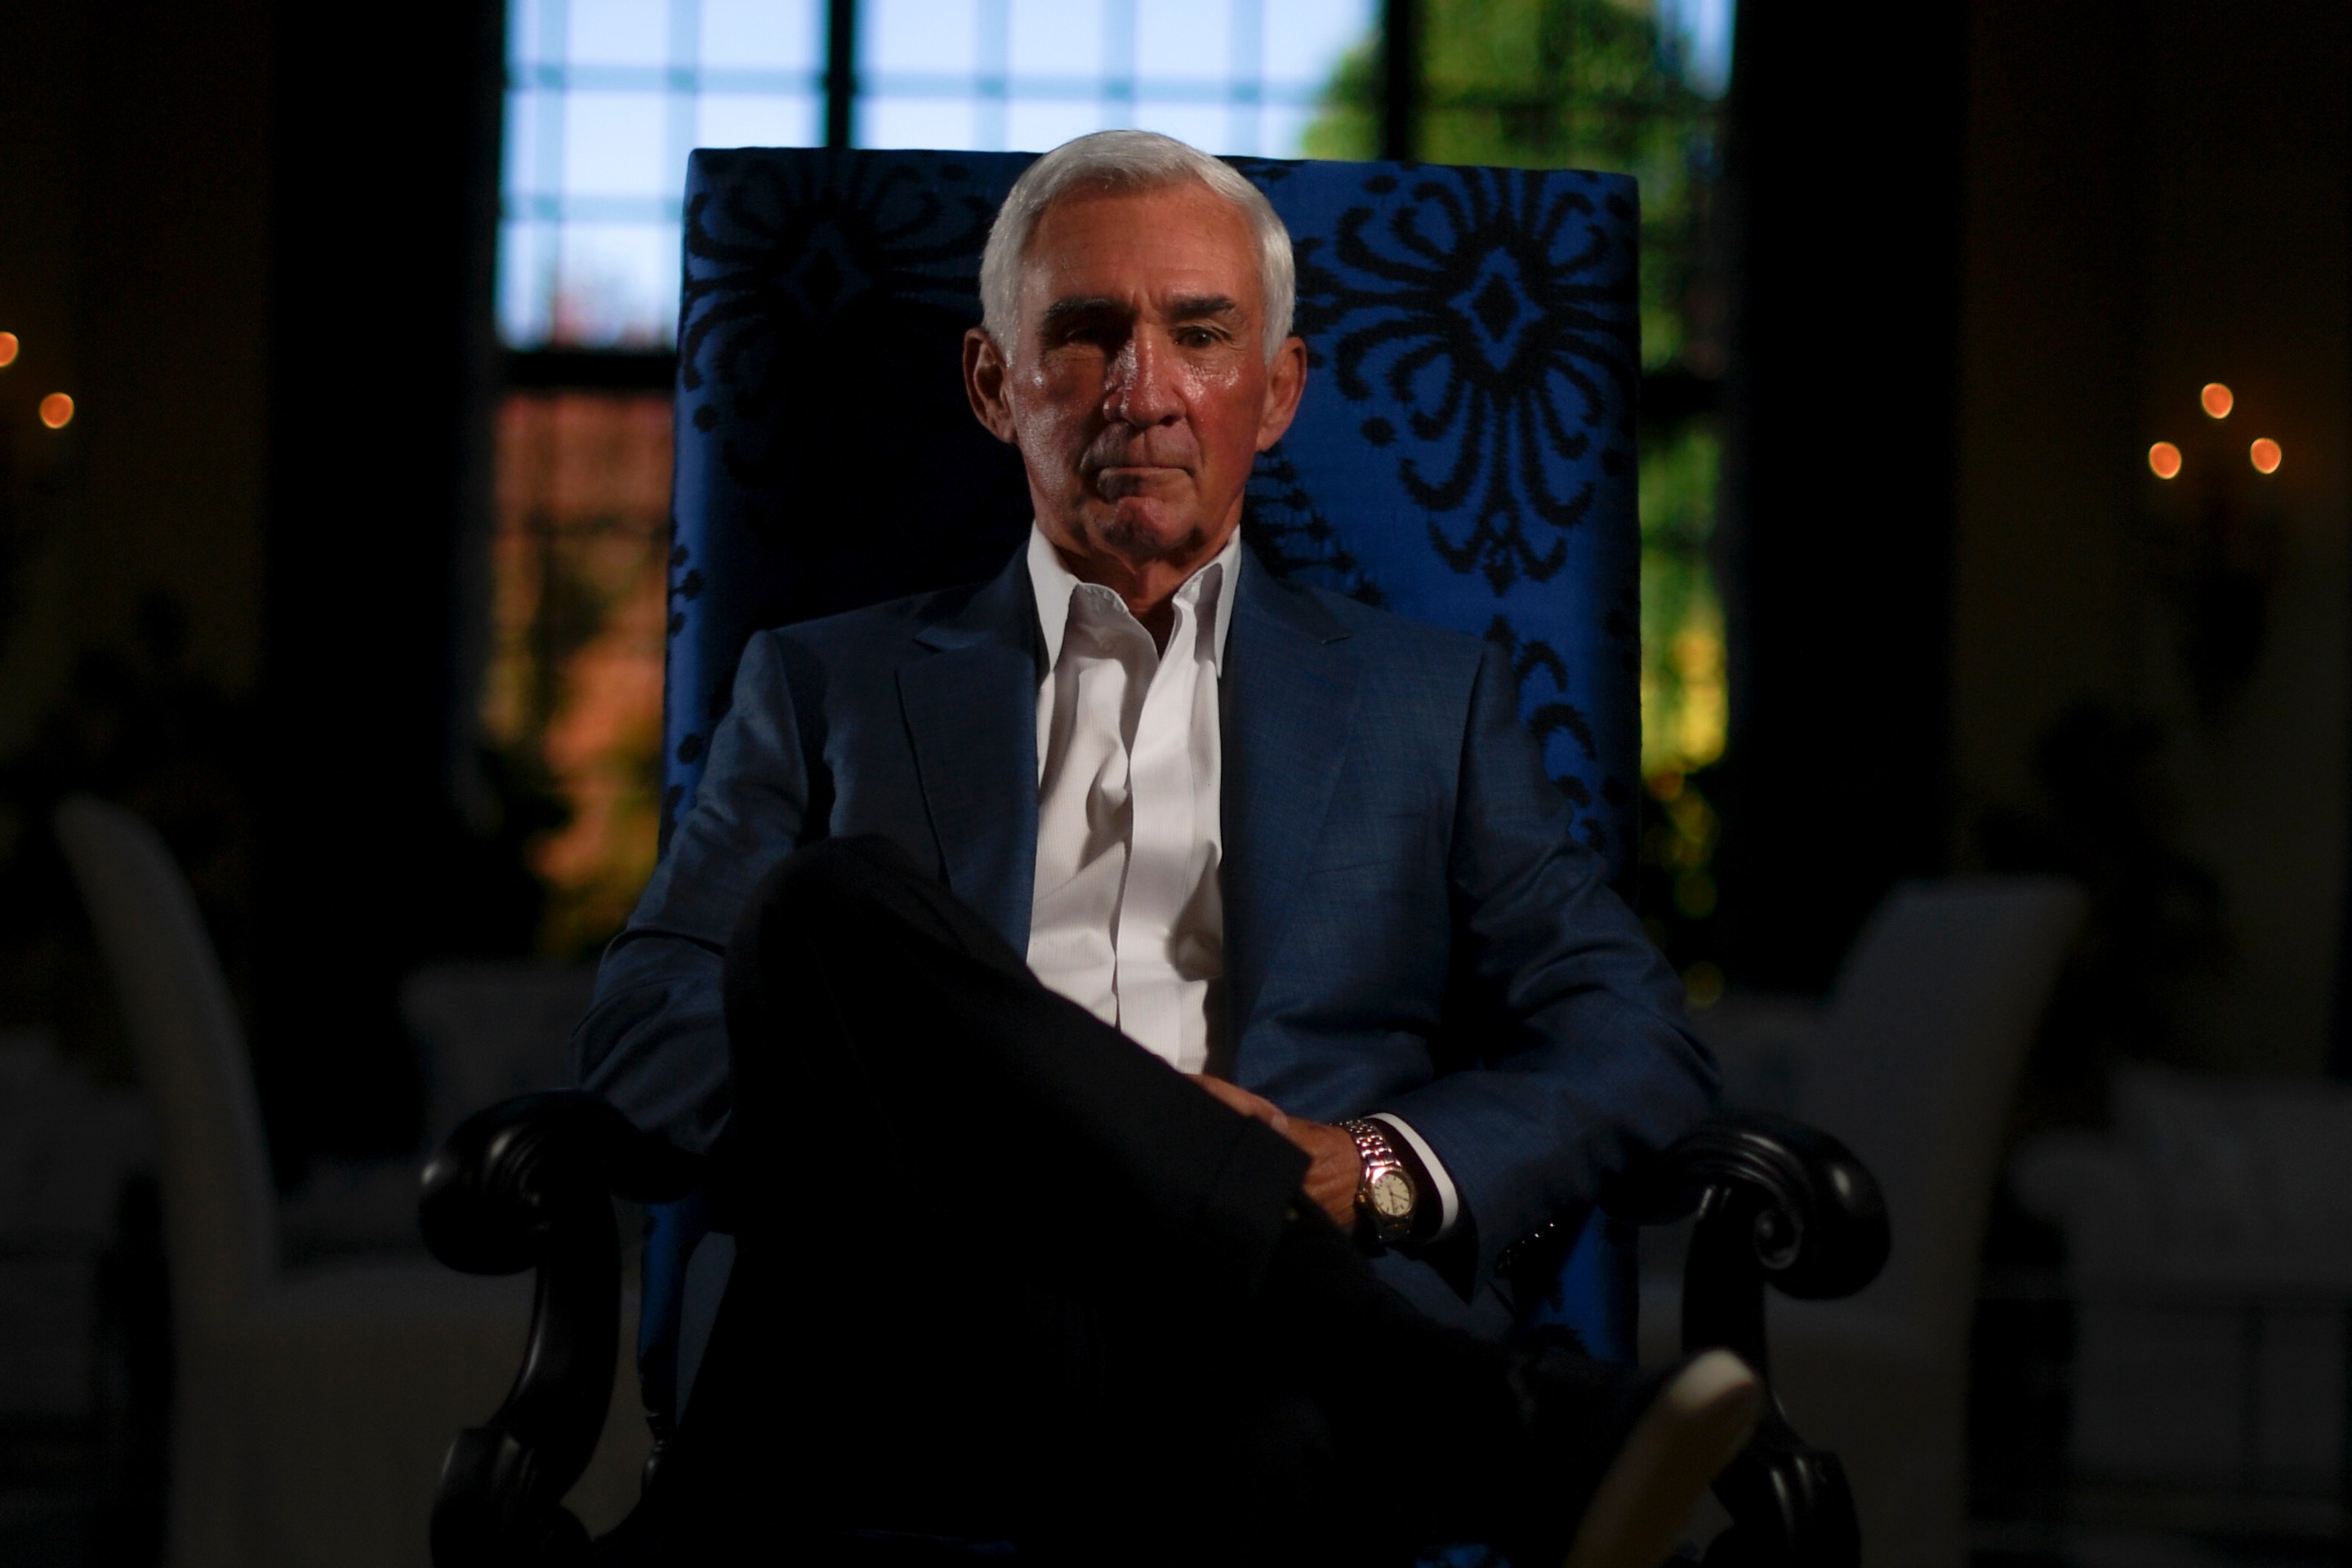 CHERRY HILLS VILLAGE, CO - OCTOBER 13: Former Denver Broncos head coach Mike Shanahan poses for a portrait at his home on Wednesday, October 13, 2021. Shanahan, who won back to back Super Bowls as Denver’s head coach in the 1990s, will be inducted into the team’s ring of fame during the Broncos’ matchup with the Las Vegas Raiders on Sunday. (Photo by AAron Ontiveroz/The Denver Post)